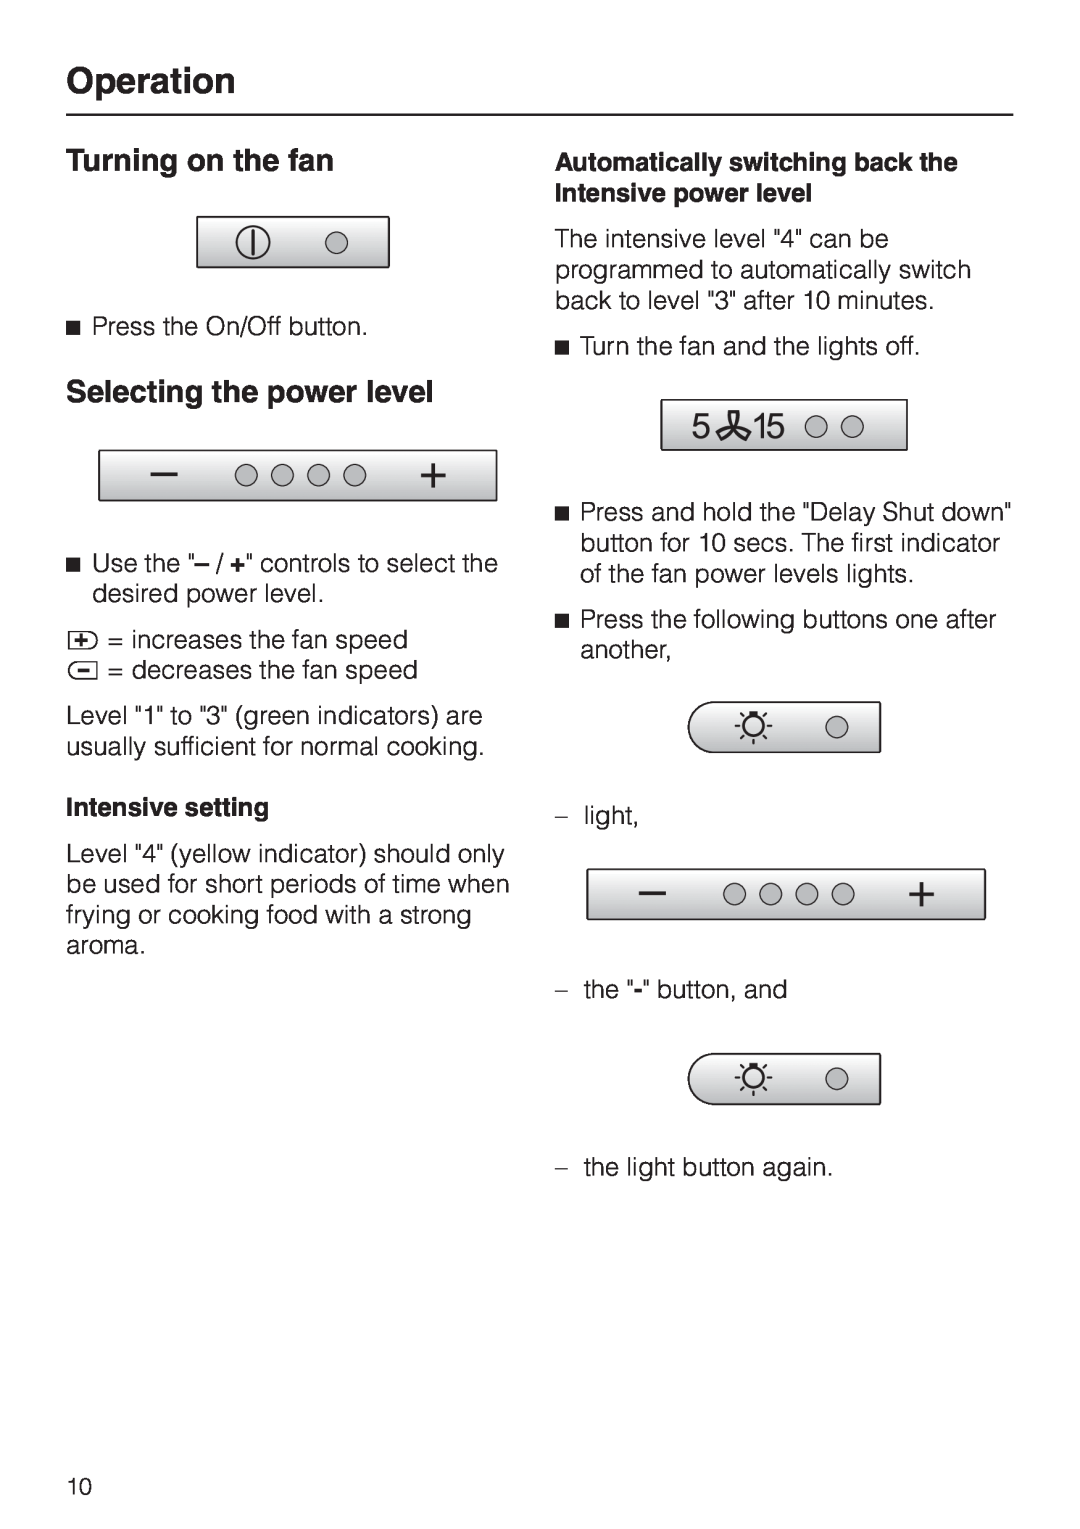 Miele DA 402 installation instructions Operation, Turning on the fan, Selecting the power level 